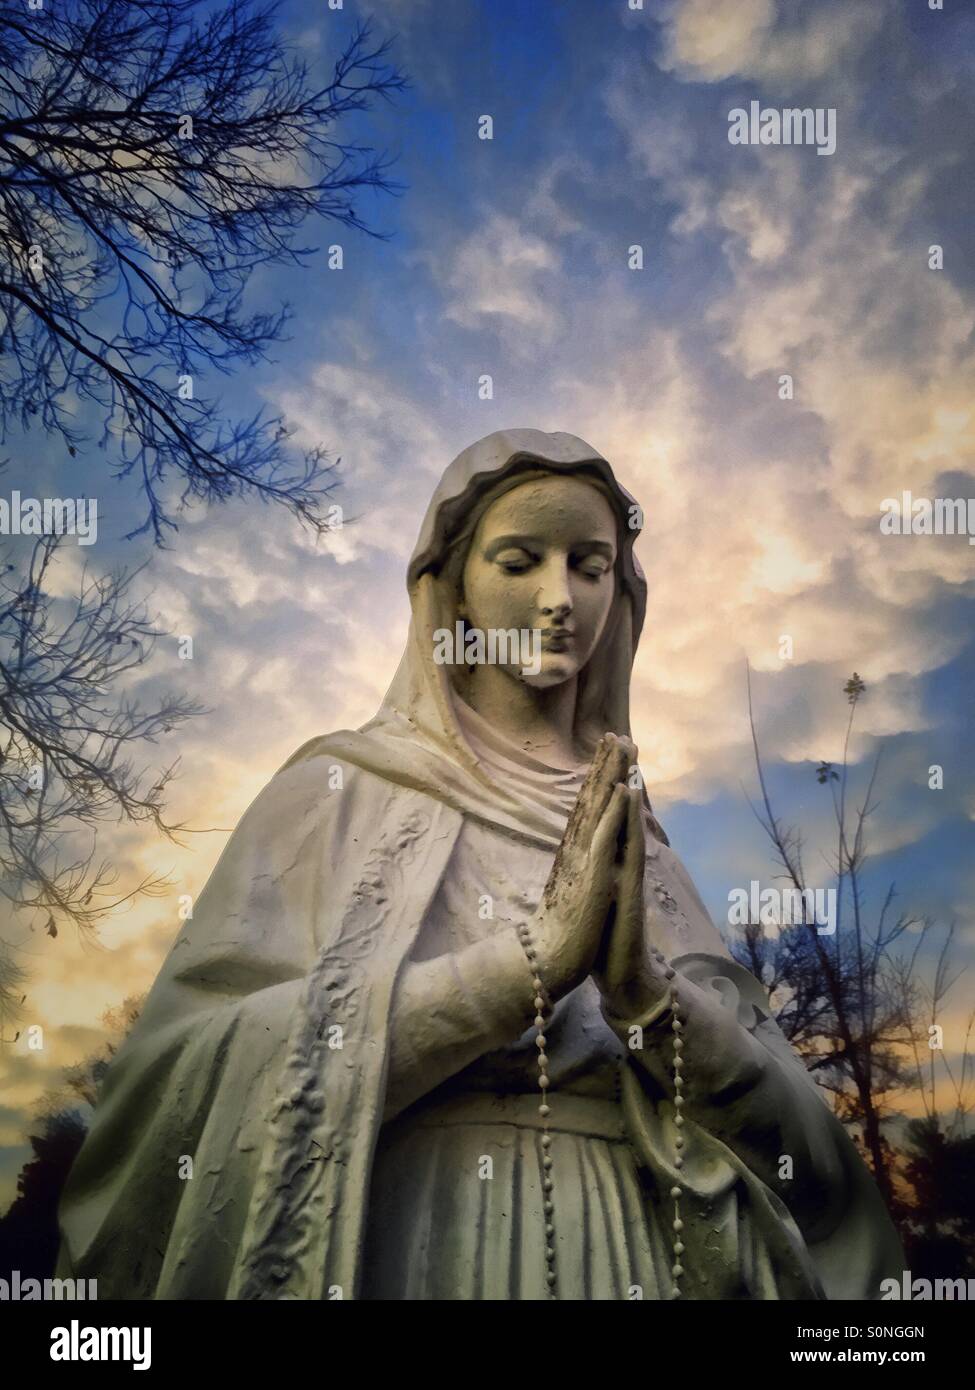 Pray that all wanderers find their way home. Stock Photo